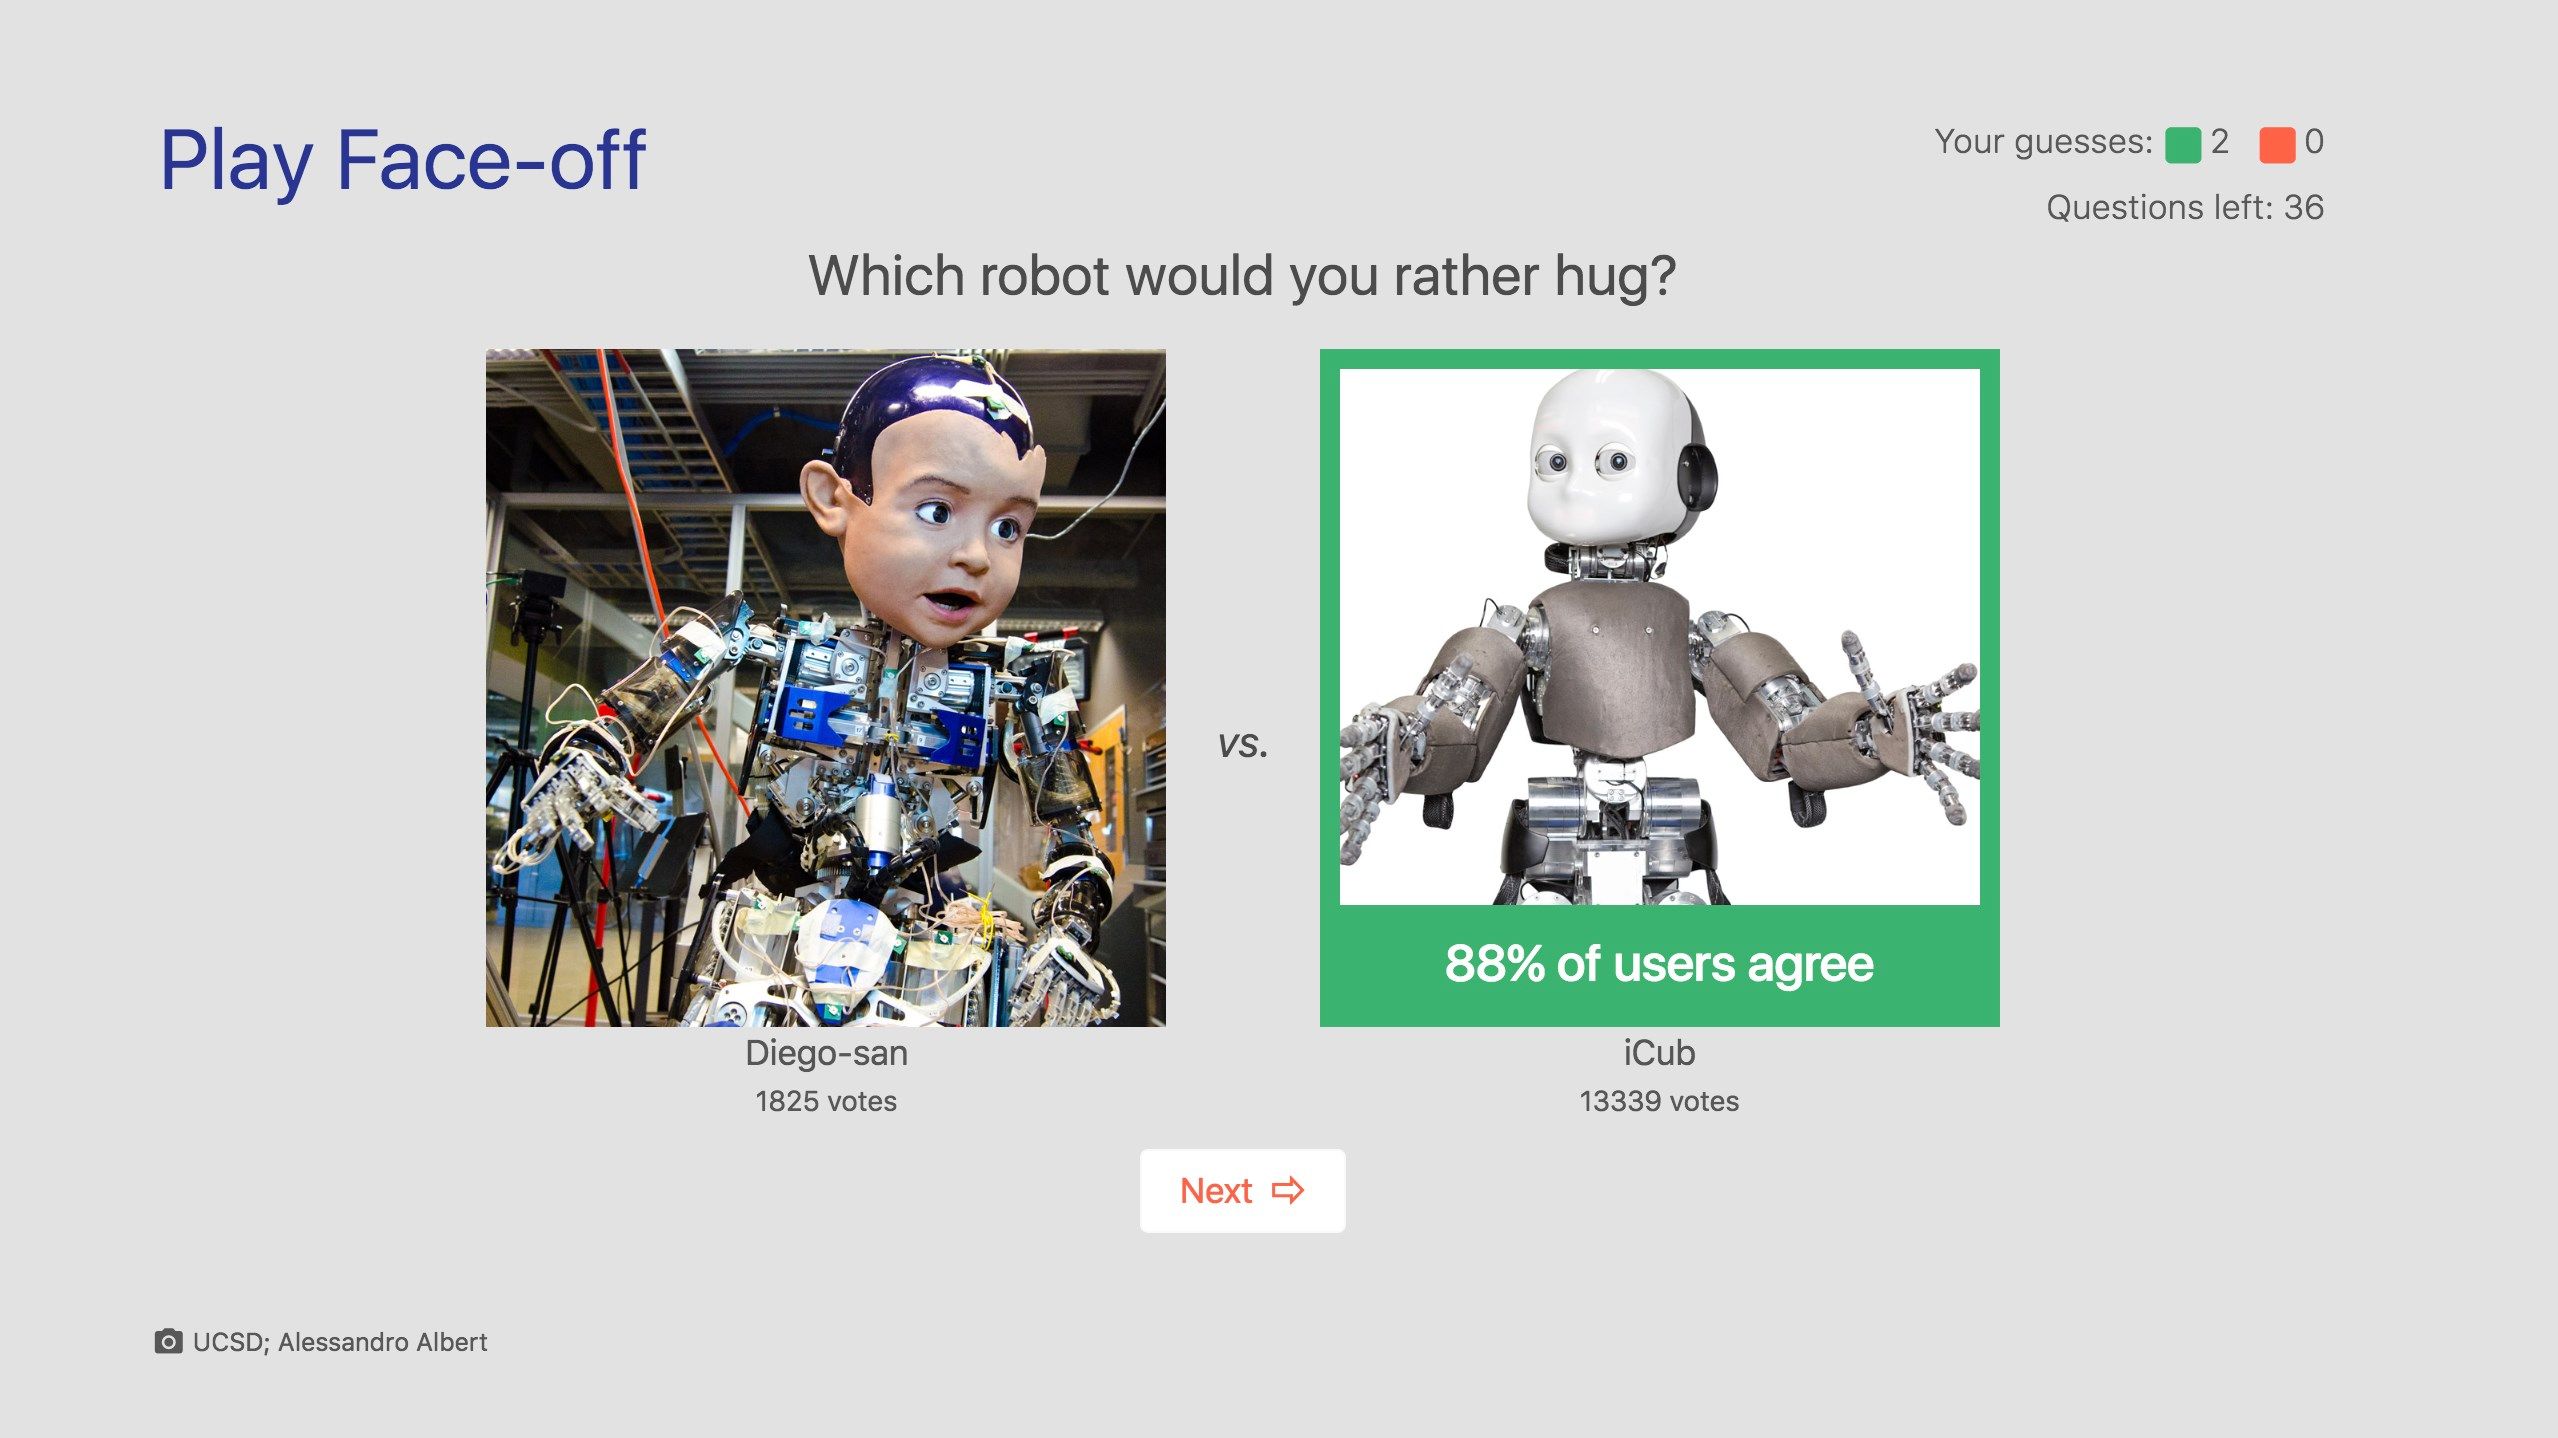 Play Face-off: Two robots, one question: you decide!